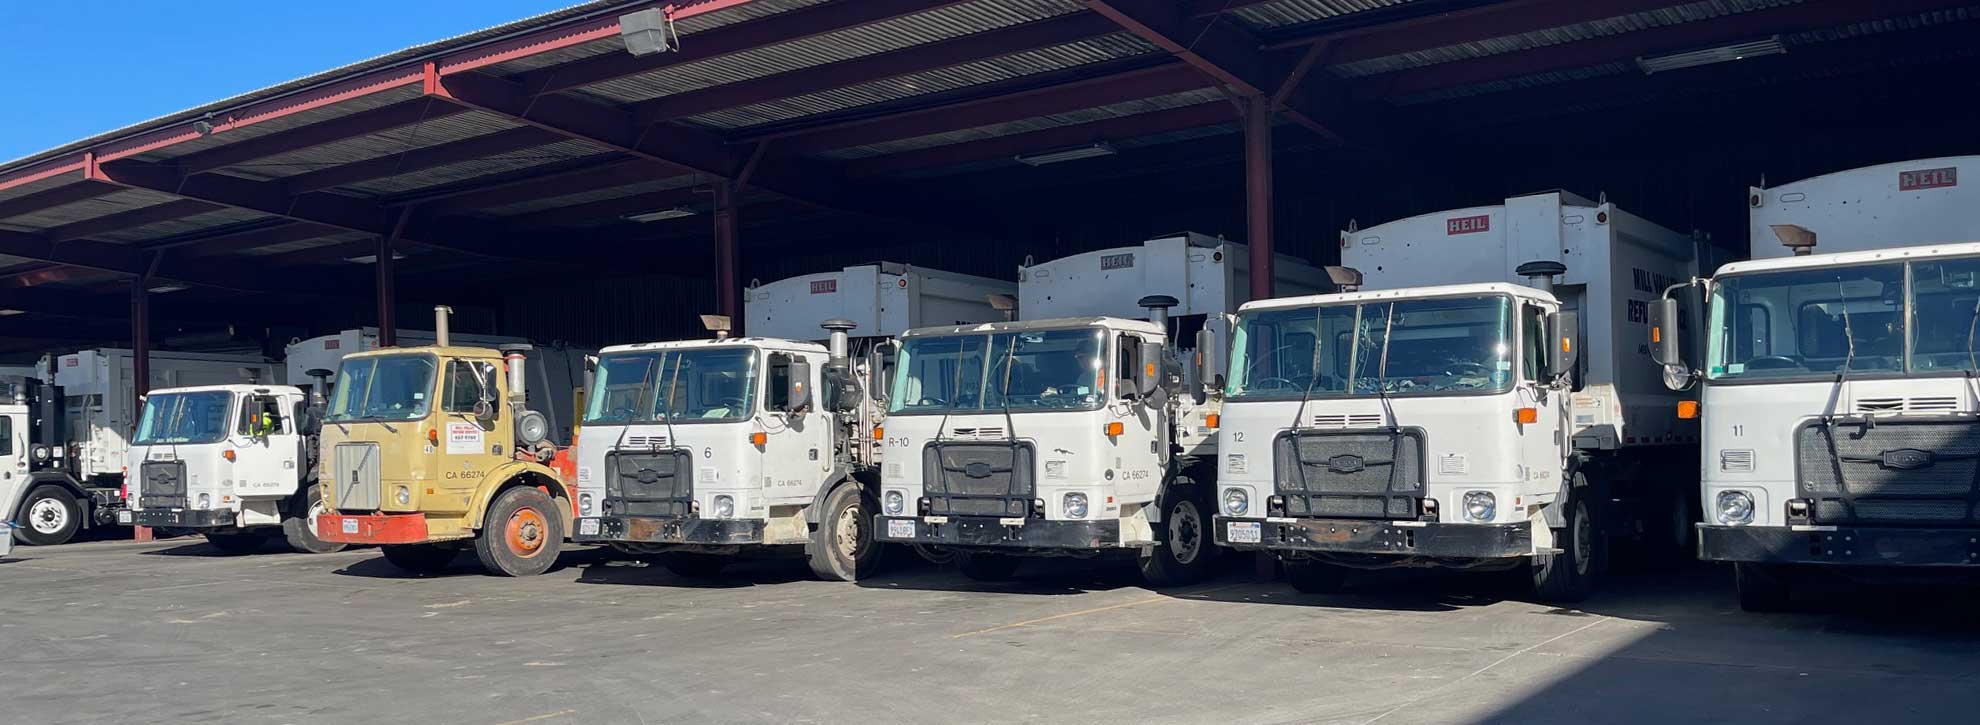 A row of garbage trucks in line at the MVRS yard.